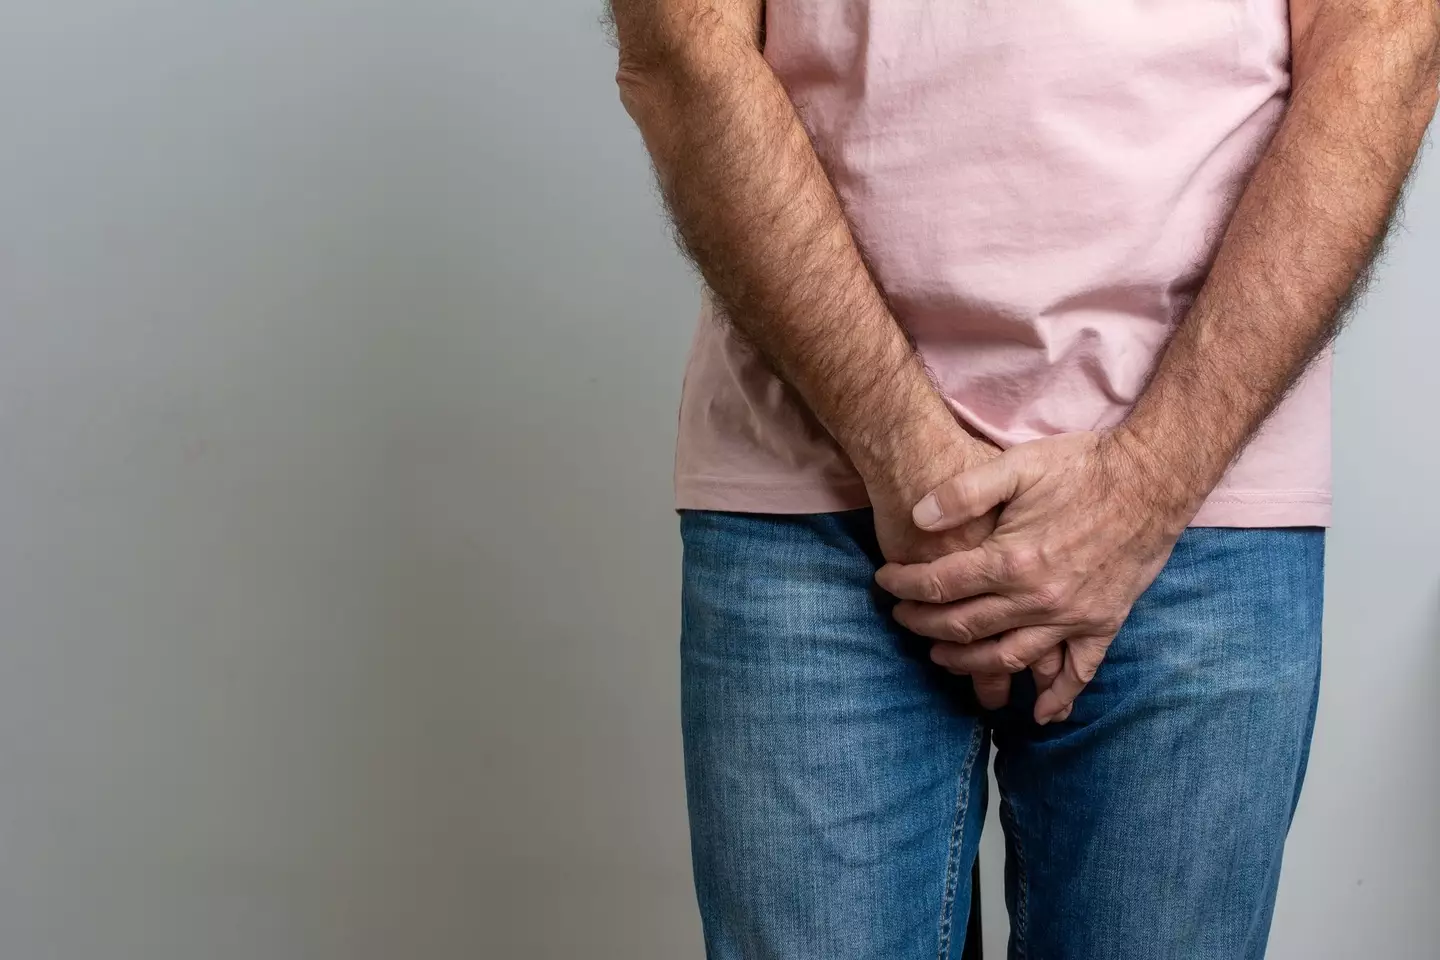 NHS Provides Official Advice For Men Wanting To Get A Bigger Penis